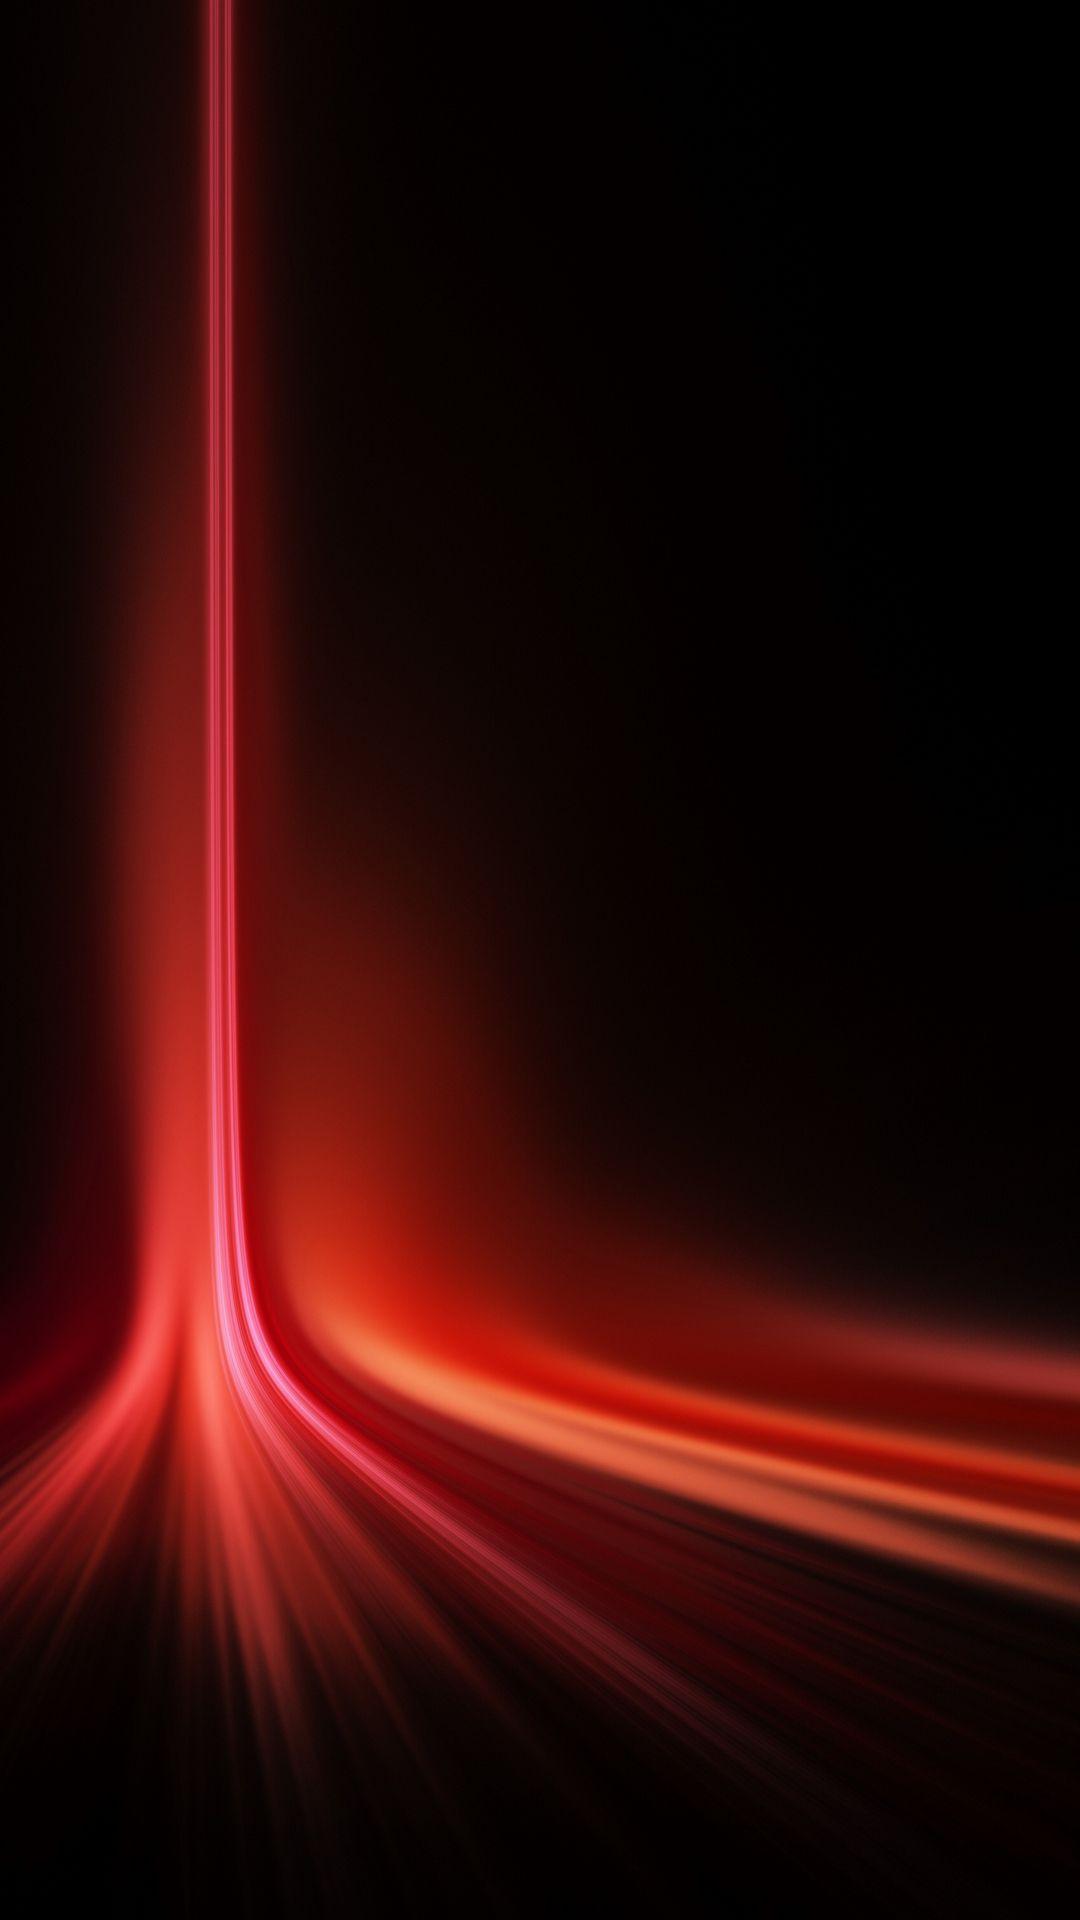 Clever Abstract iPhone Wallpaper For Art Lovers. HD wallpaper